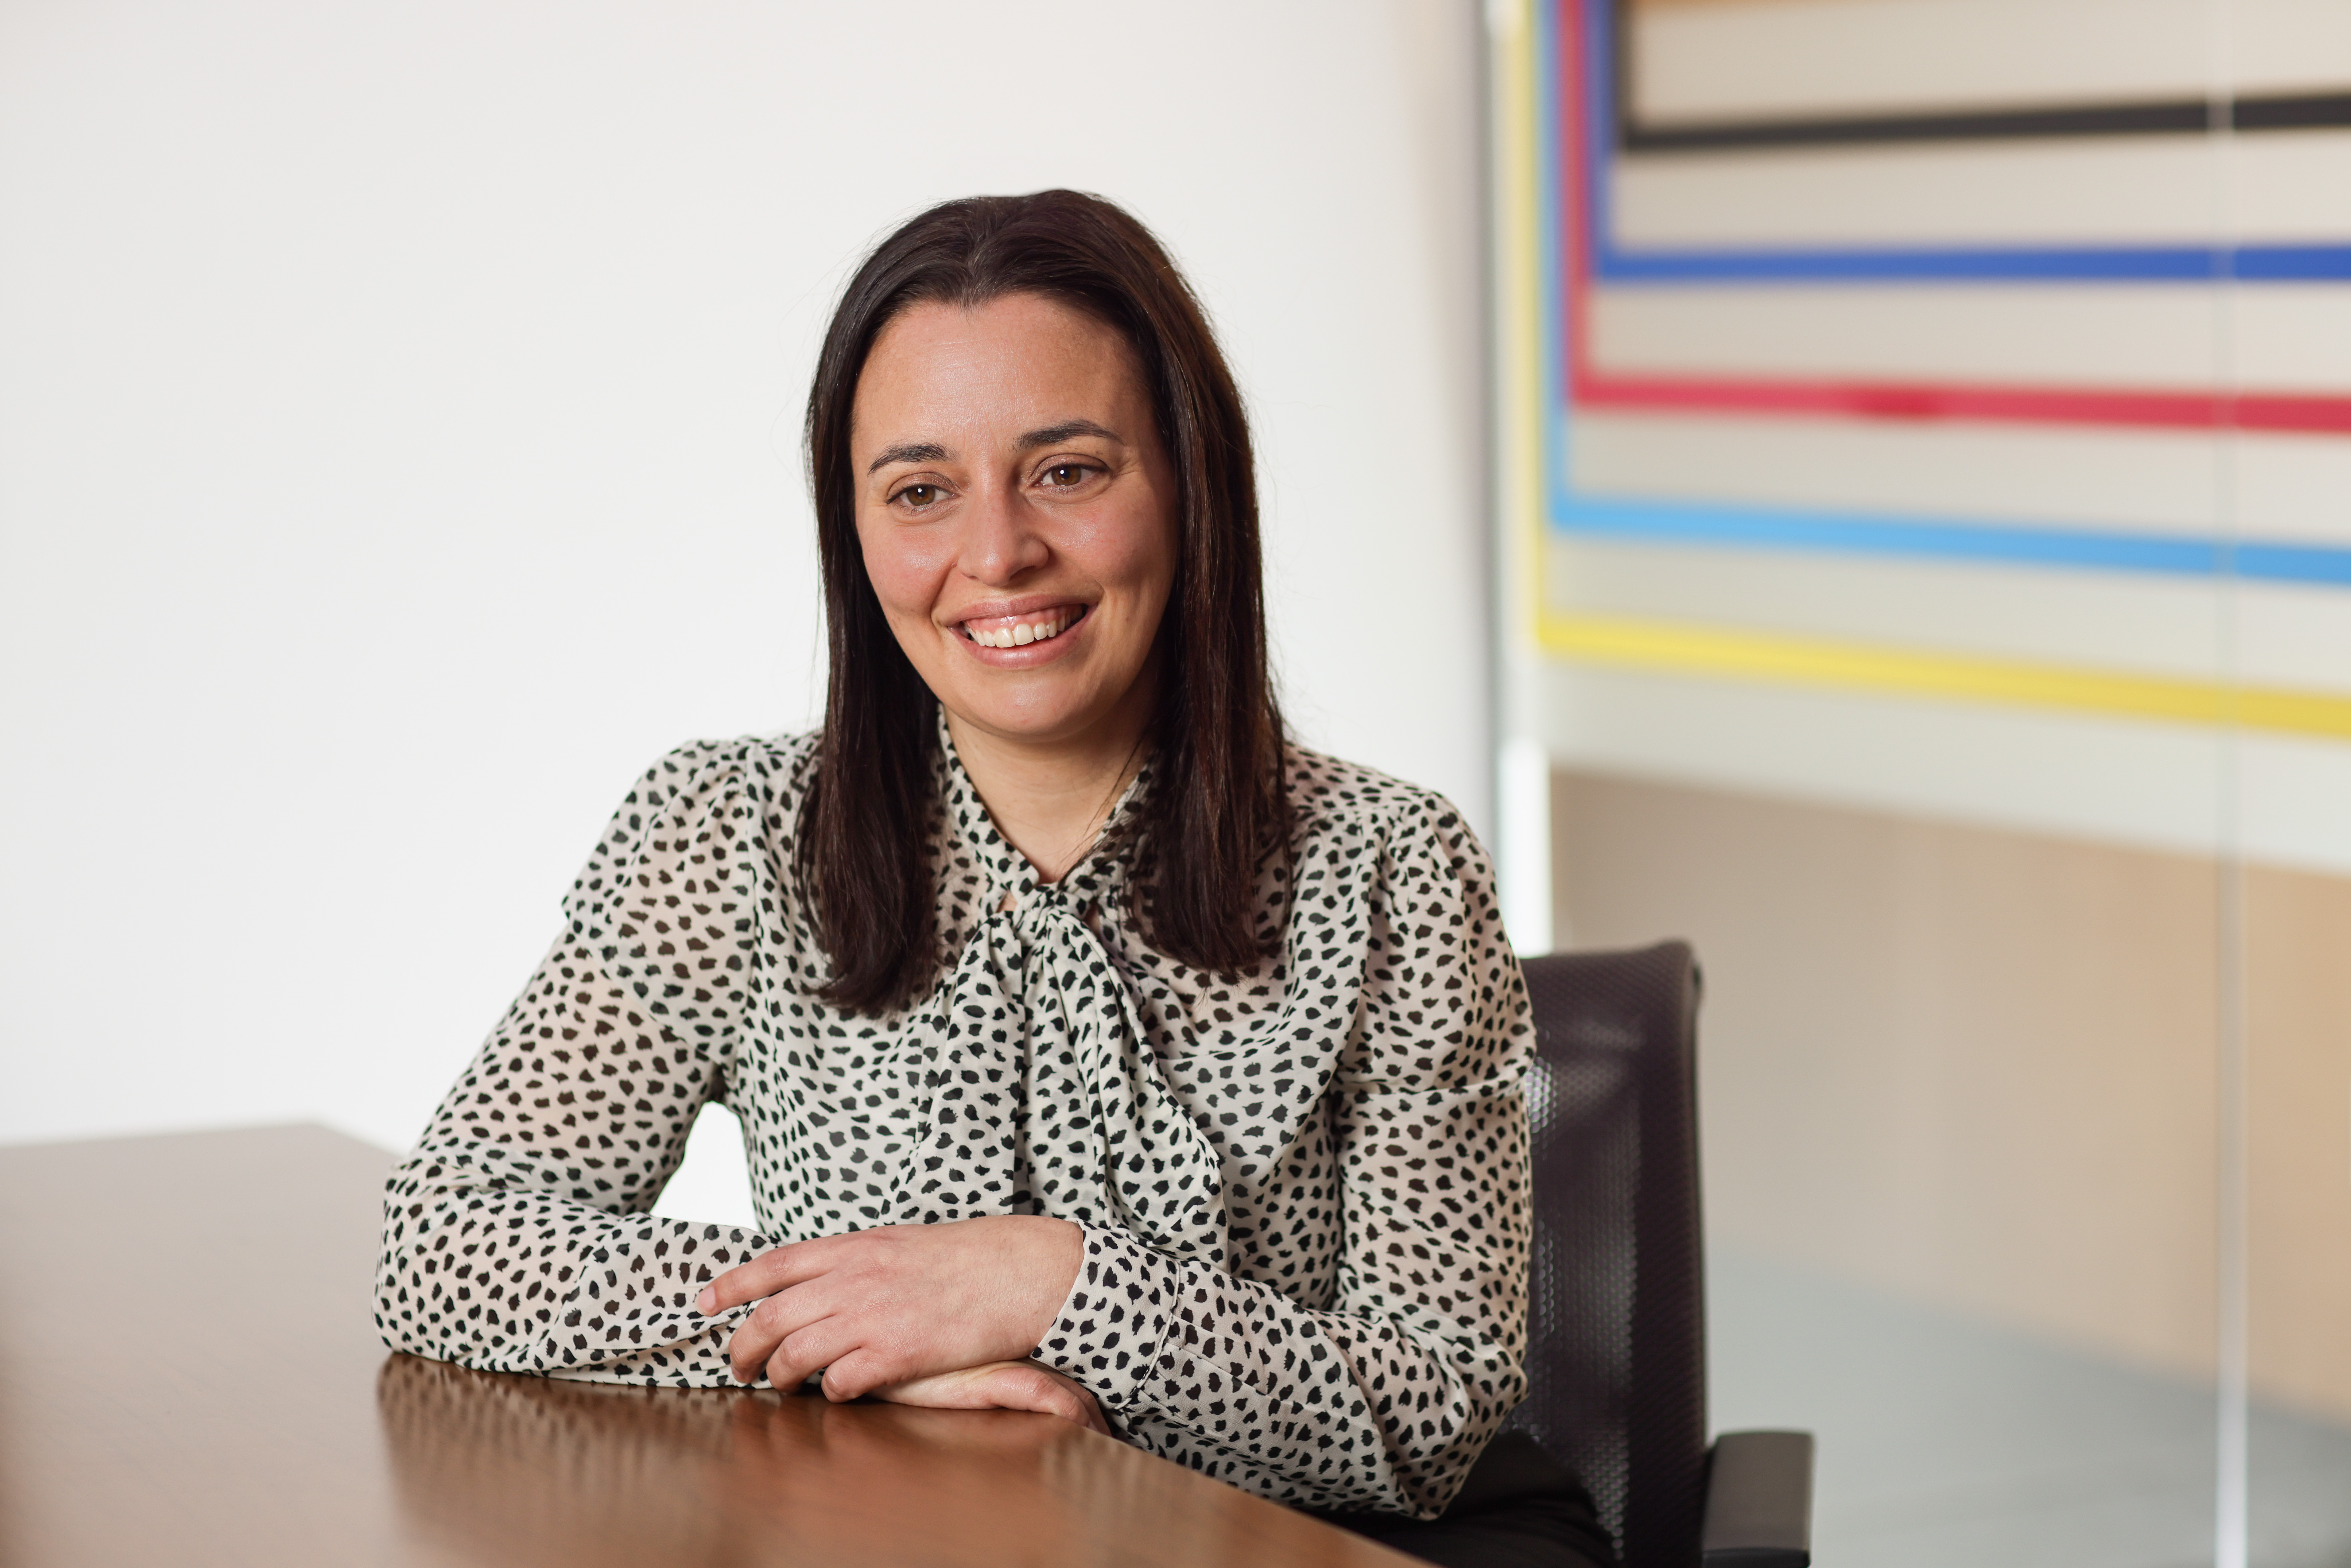 Independent director and governance consultancy services business Altair Partners has strengthened its business appointing Kelly Gouveia as Head of Compliance Services